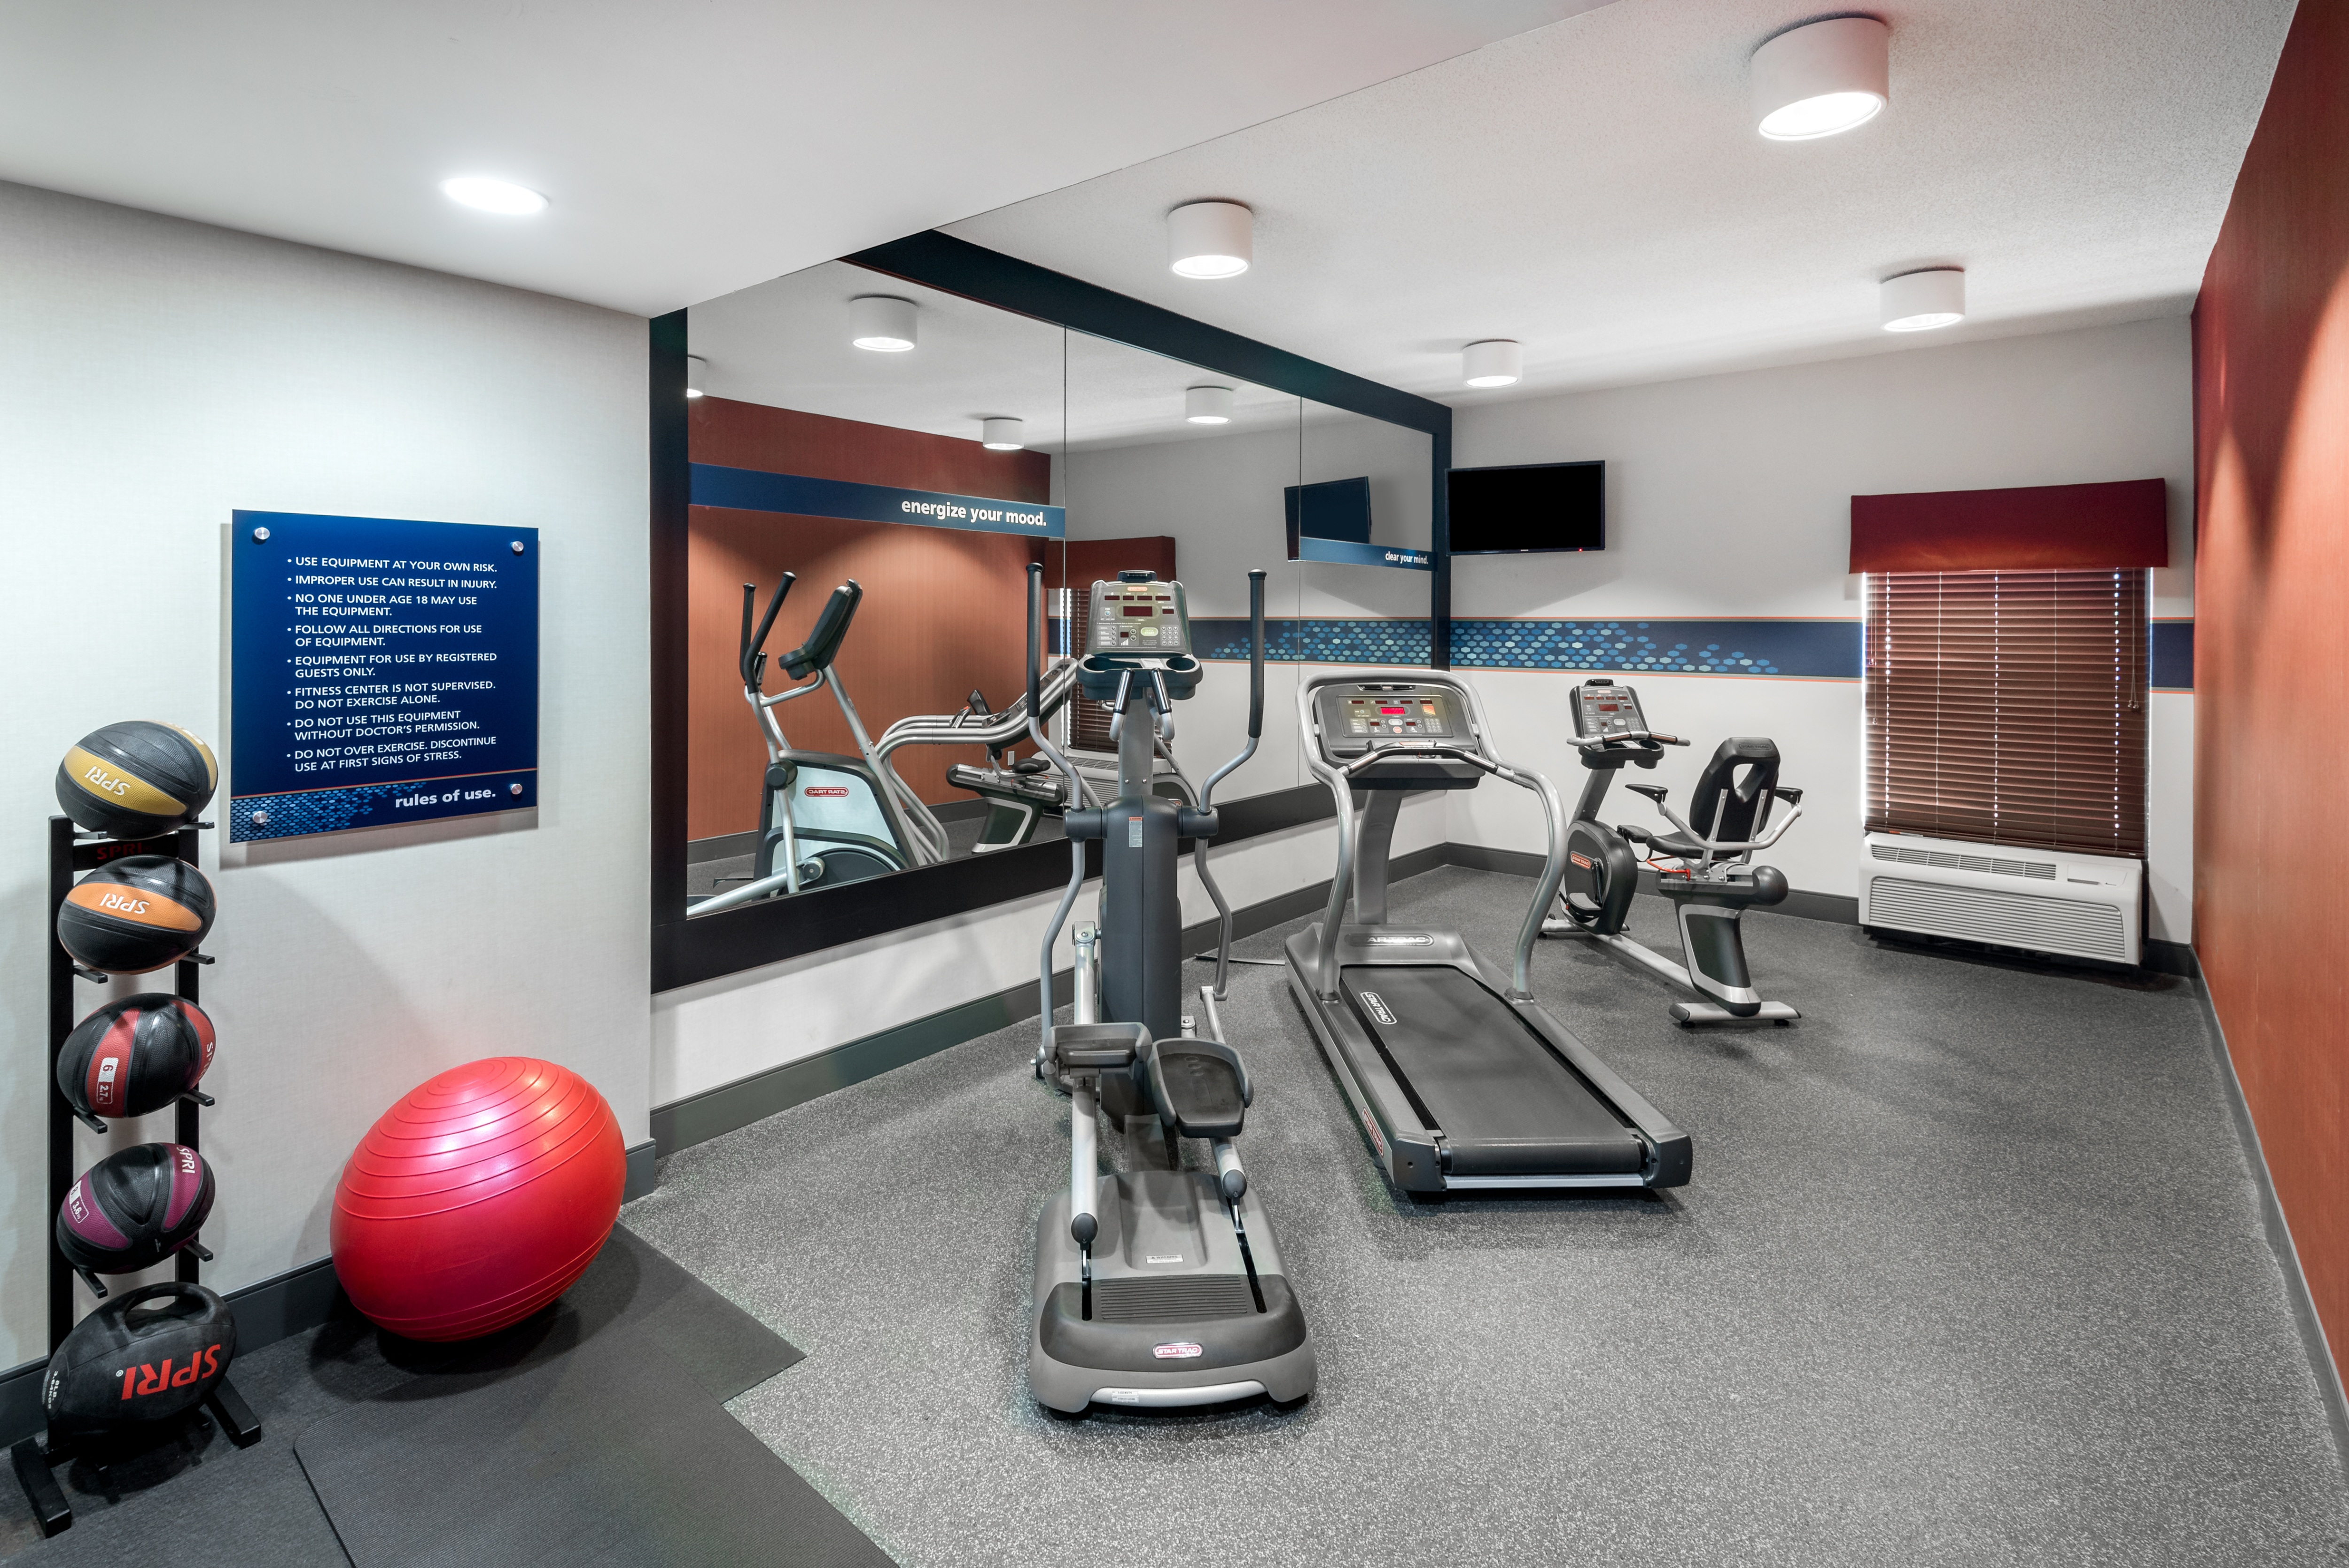 Fitness Center with Exercise Balls and Treadmill and Other Equipment